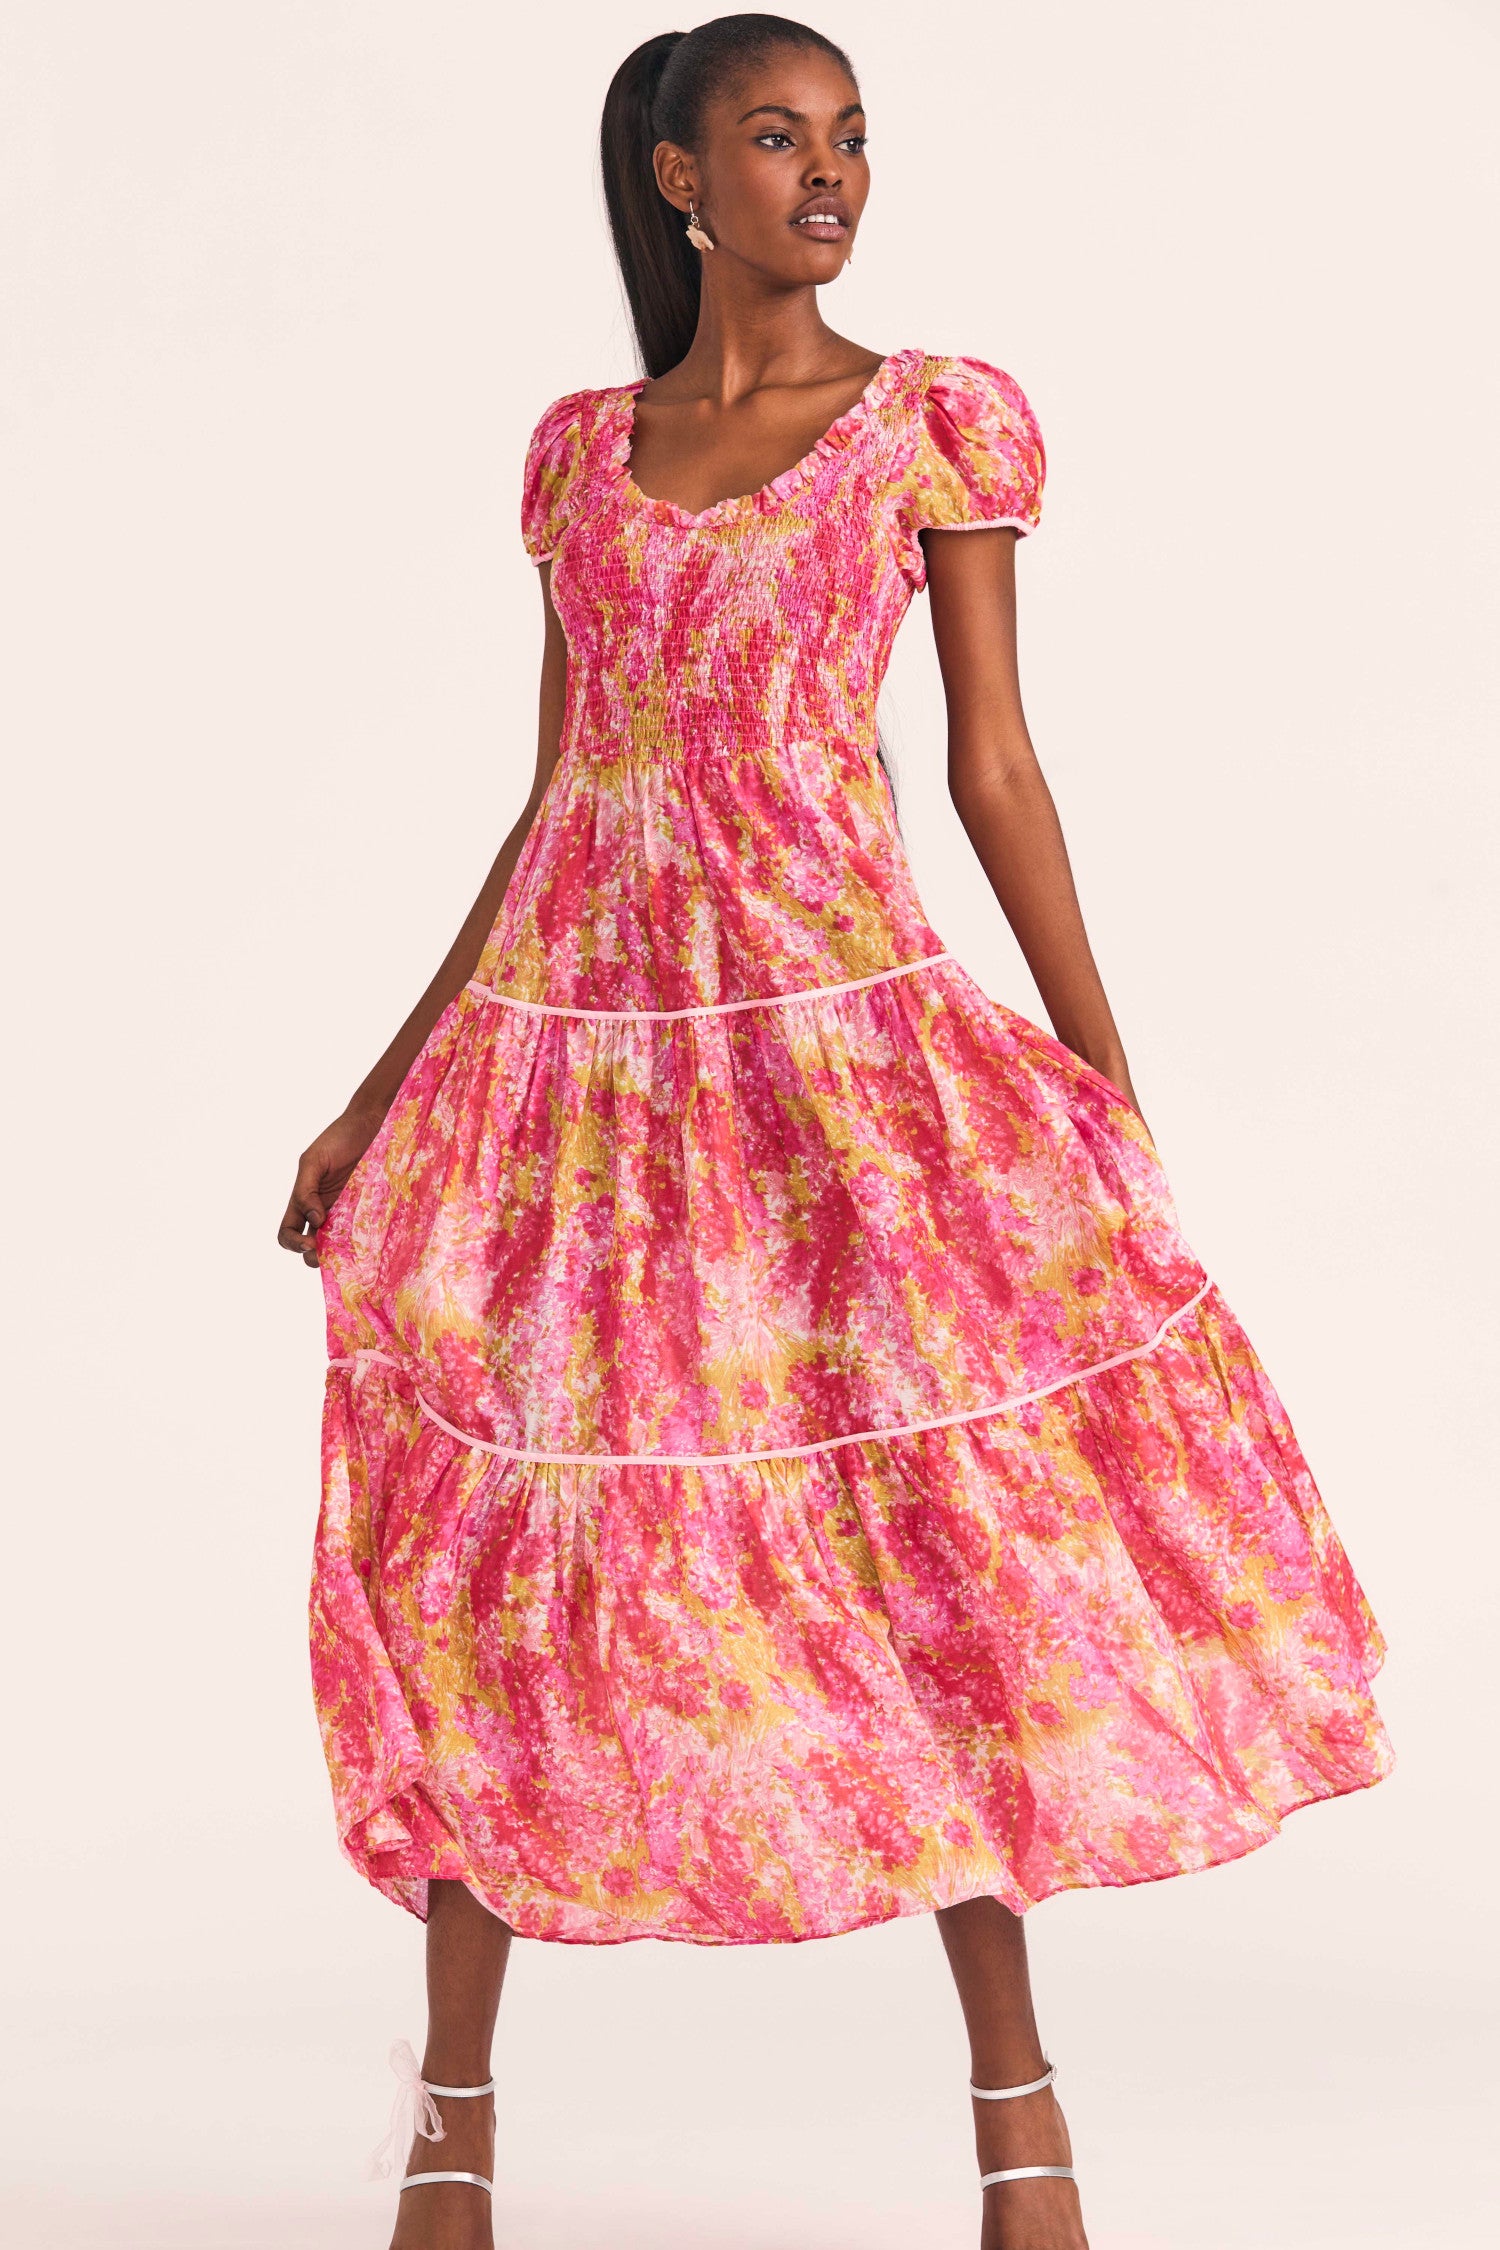 Women's pink and coral cotton-silk blend dress with a hand-painted impressionistic watercolor print and contrast piping.